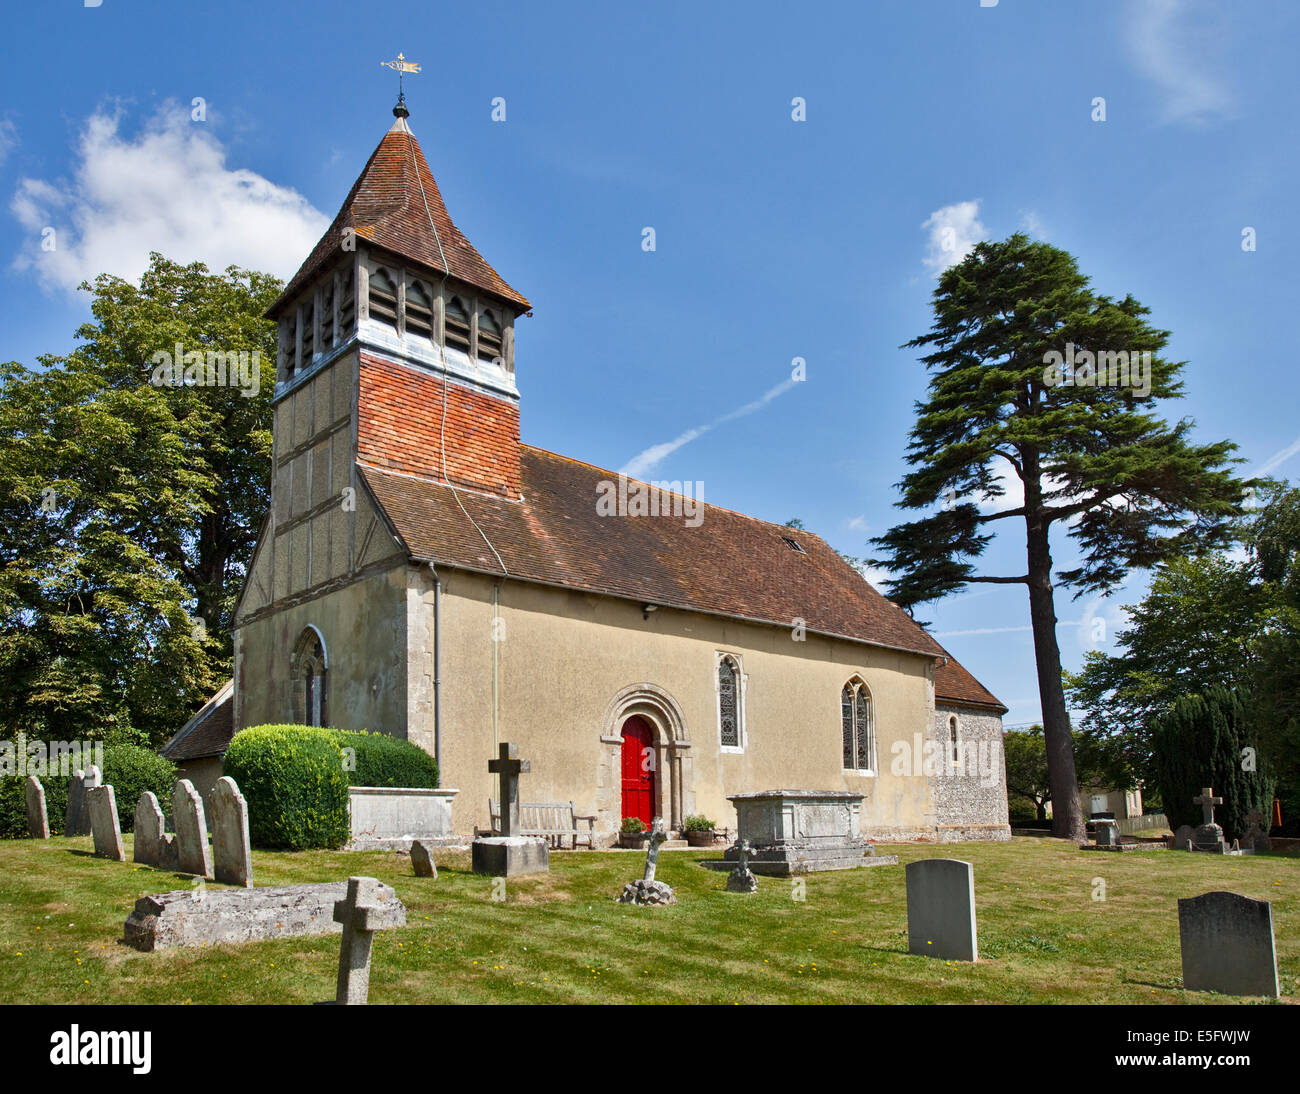 St Swithun's Church, Martyr digne, Hampshire, Angleterre Banque D'Images